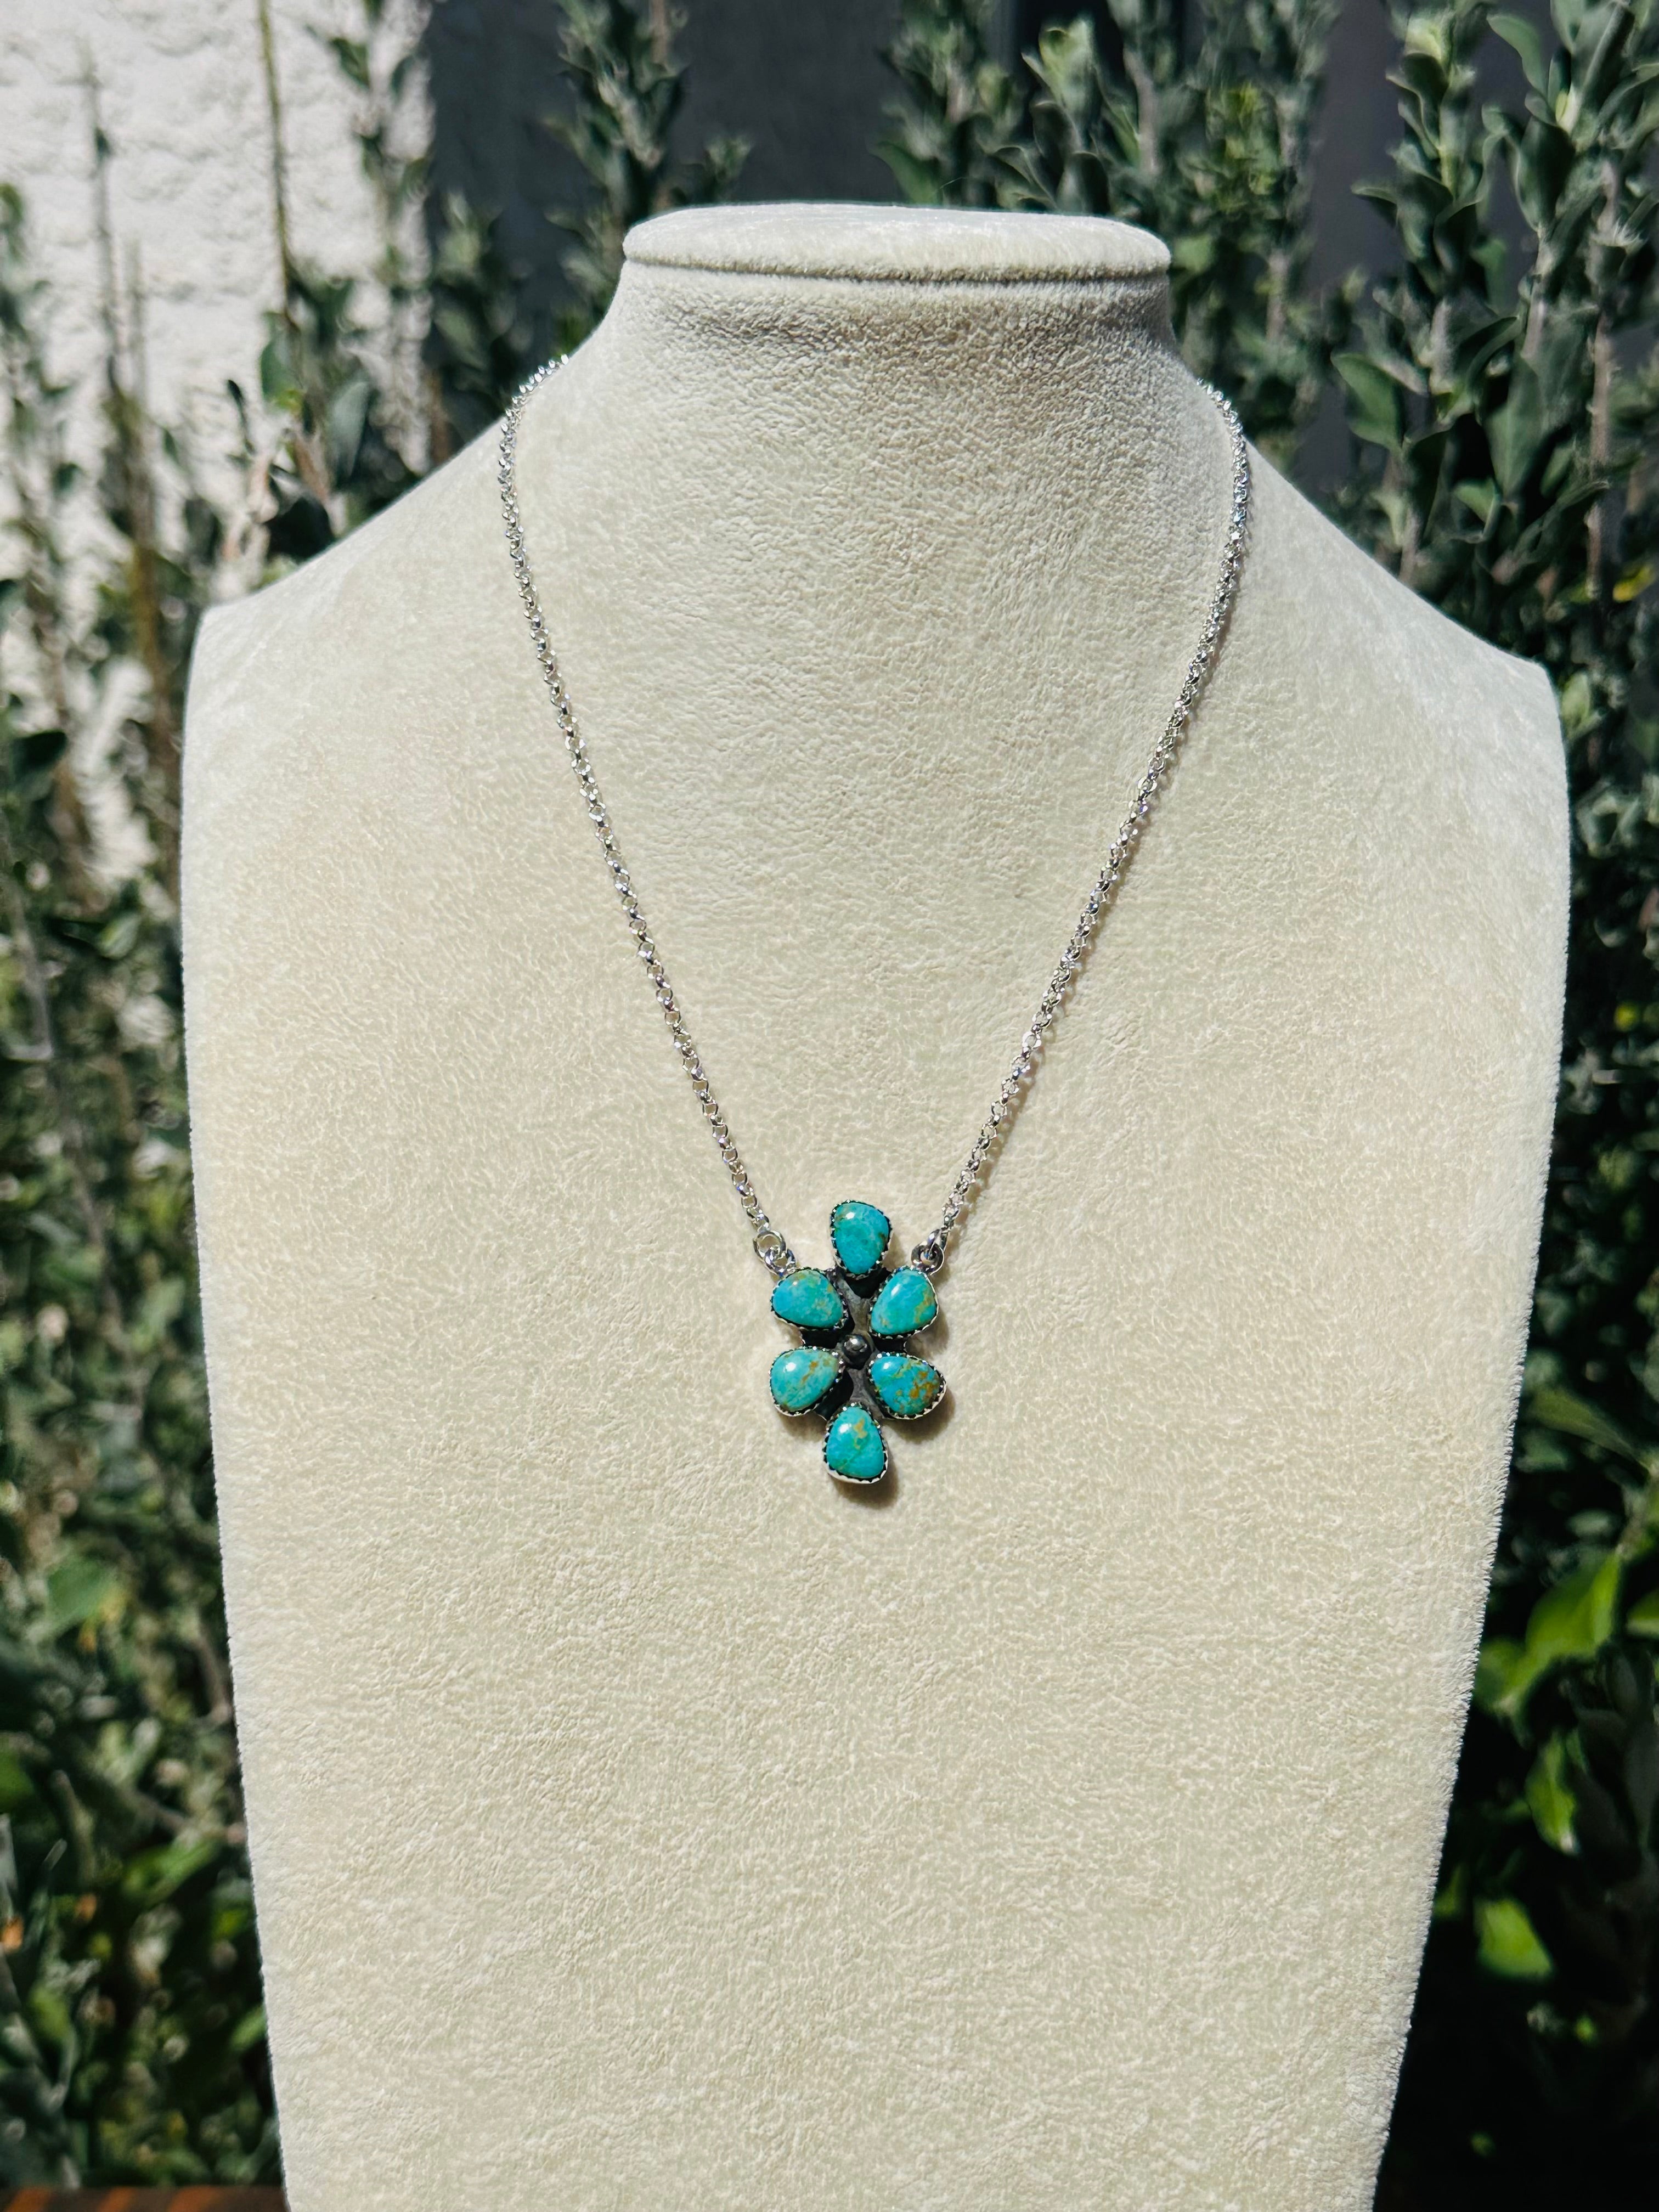 Southwest Handmade Kingman Turquoise & Sterling Silver Cluster Necklace